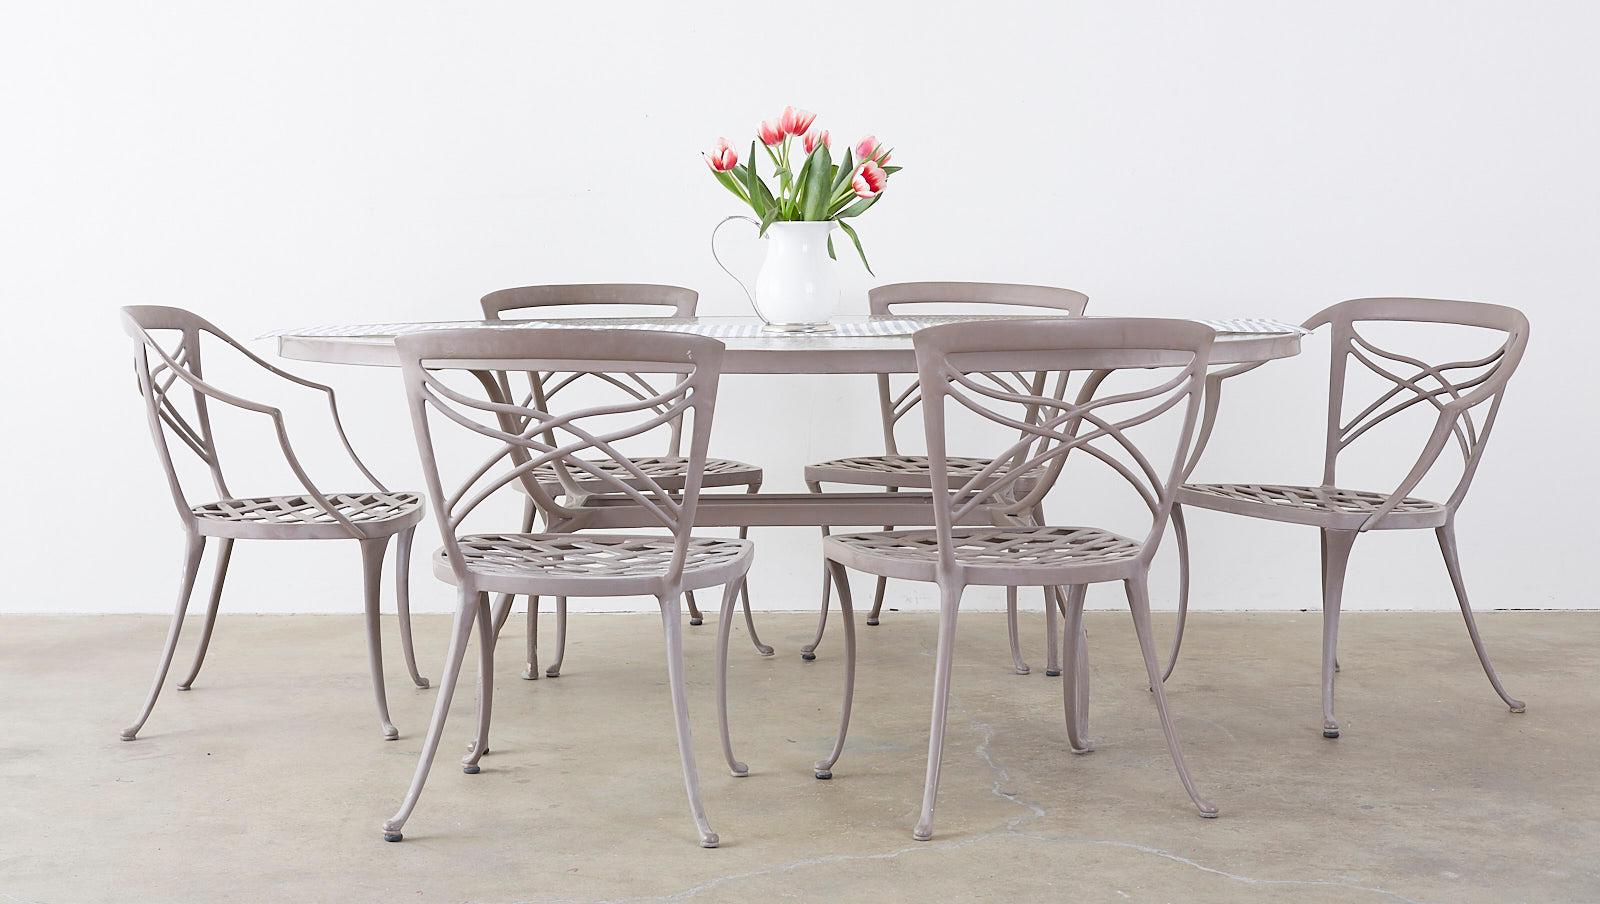 Elegant powder coated aluminum patio or garden table made by Brown Jordan in the neoclassical style. Features a large oval frame inset with a piece of textured glass. Supported by klismos style legs with graceful curves that conjoin in the center